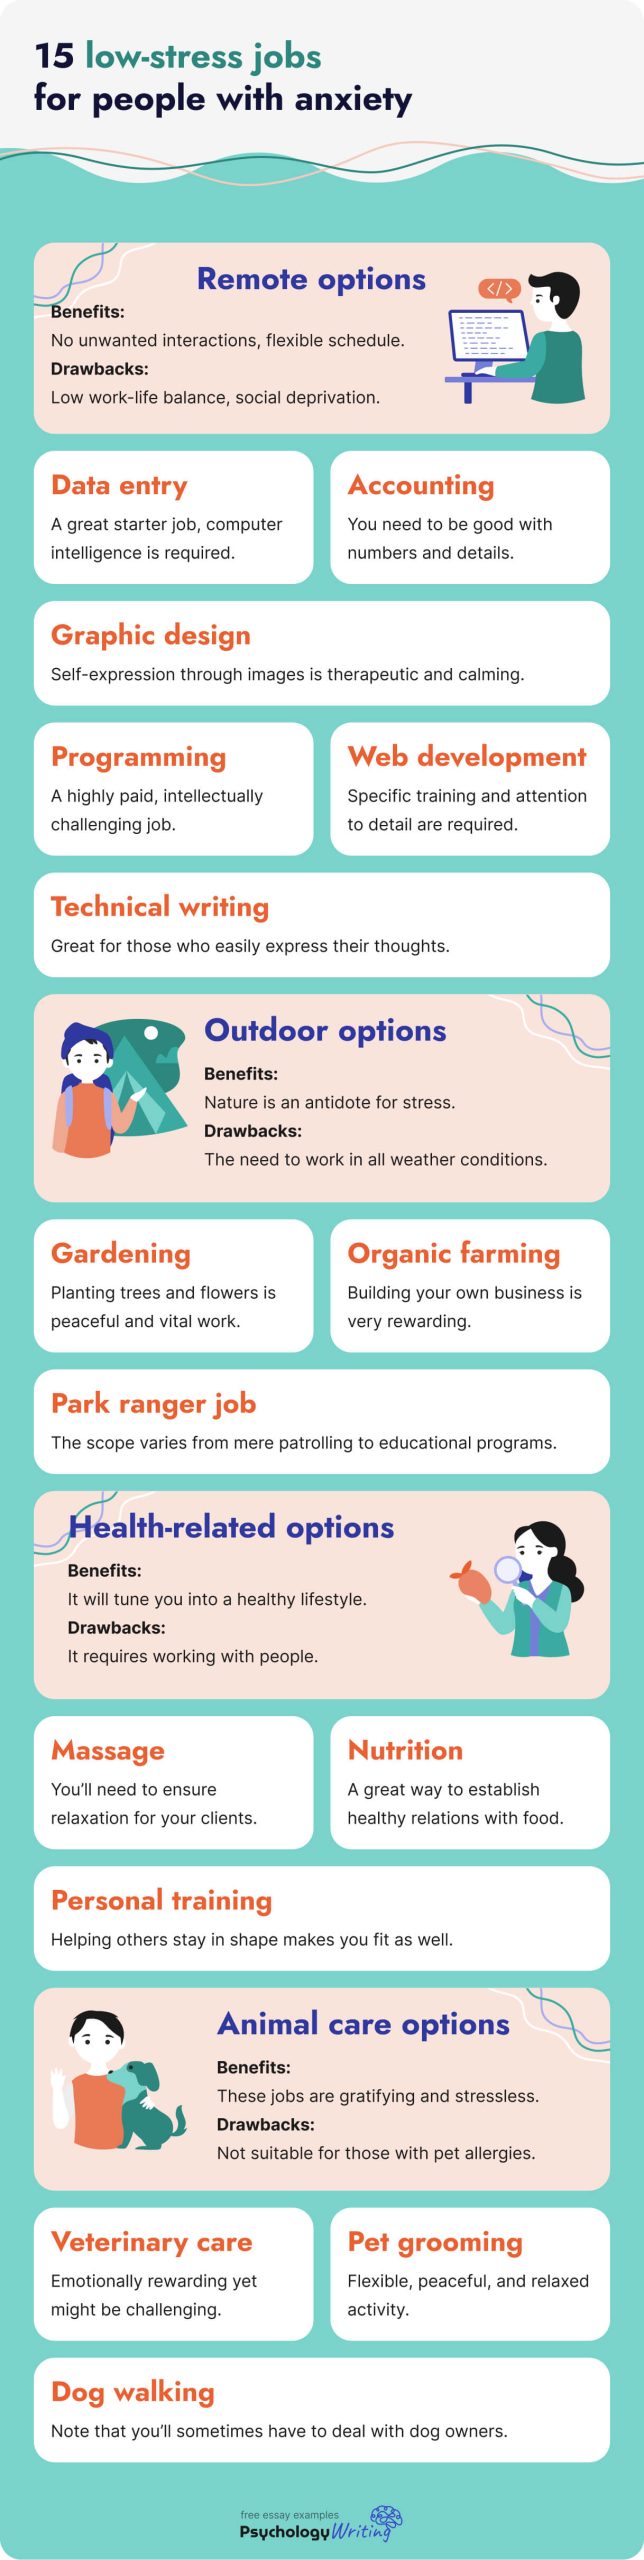 The infographic lists 15 low-stress job options in 4 spheres.